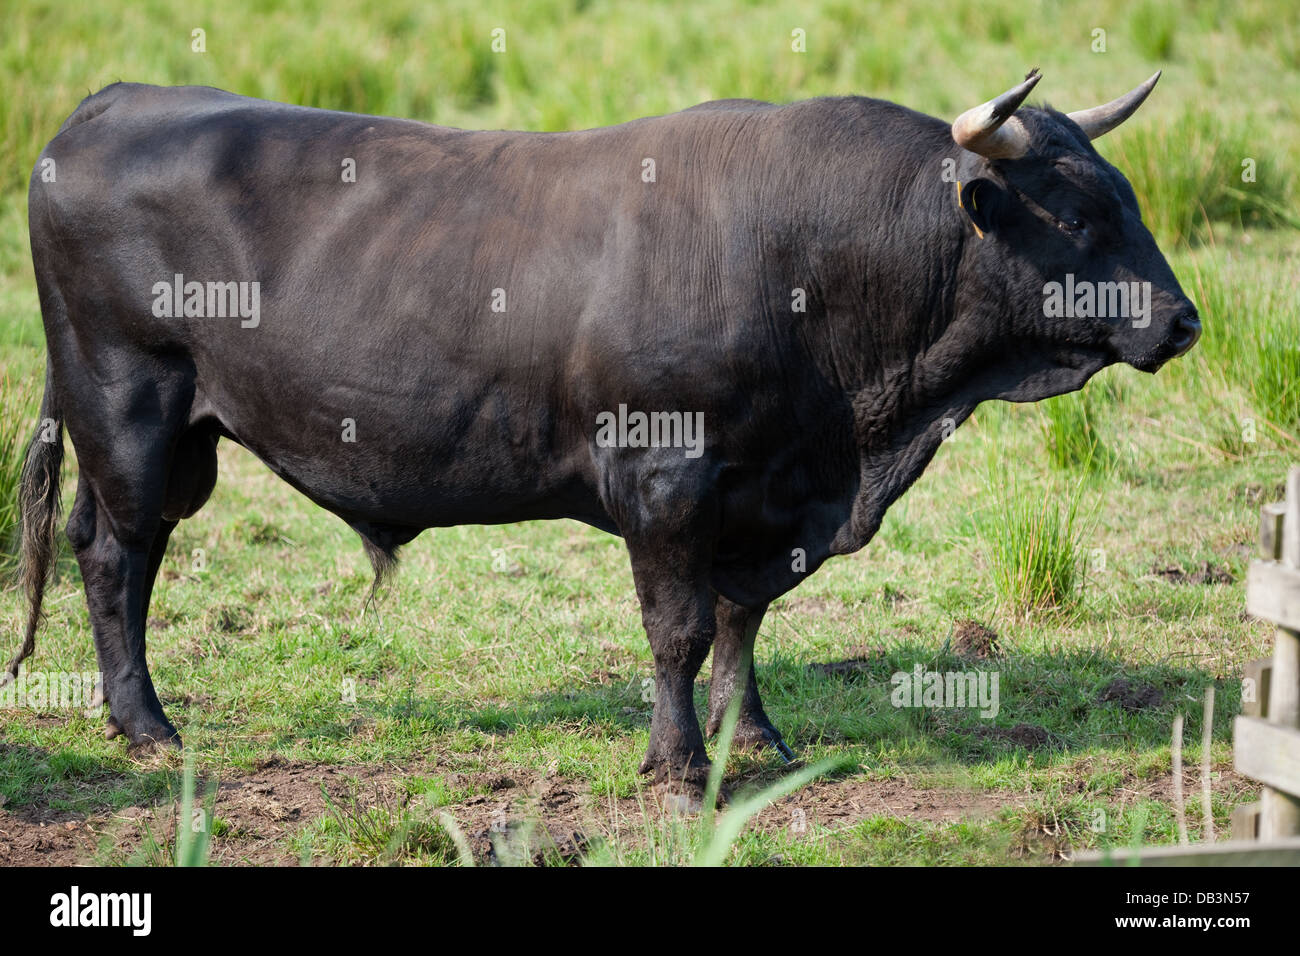 Welsh Black Cattle (Bos taurus). Bull. A docile breed- not all bulls need to be ringed in the nose. Stock Photo